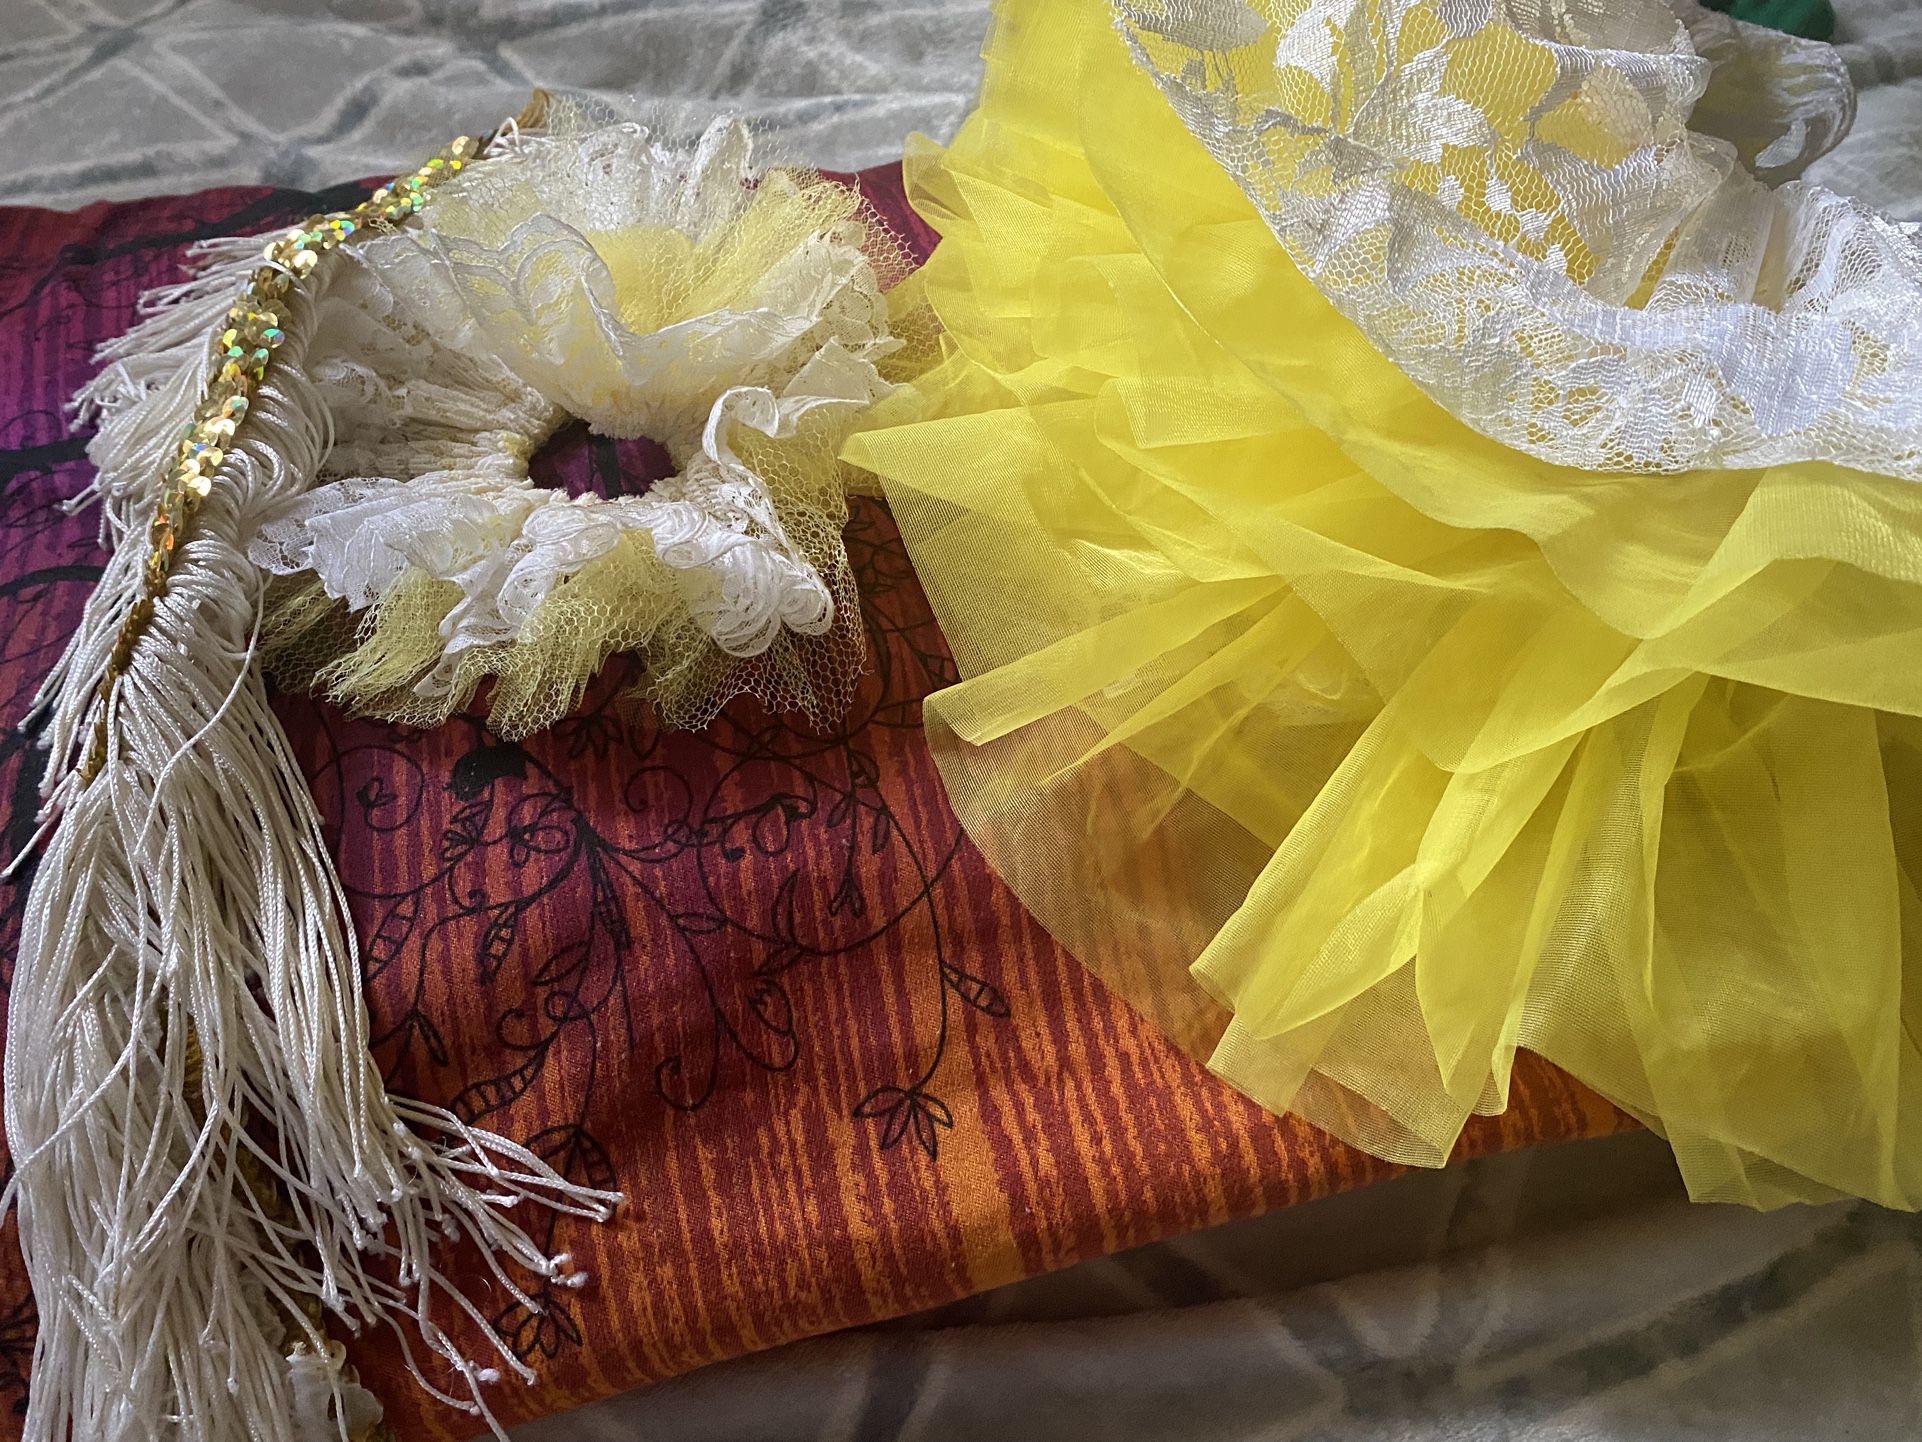 Tulle Fabric, Lace, Sequin Band & fringe